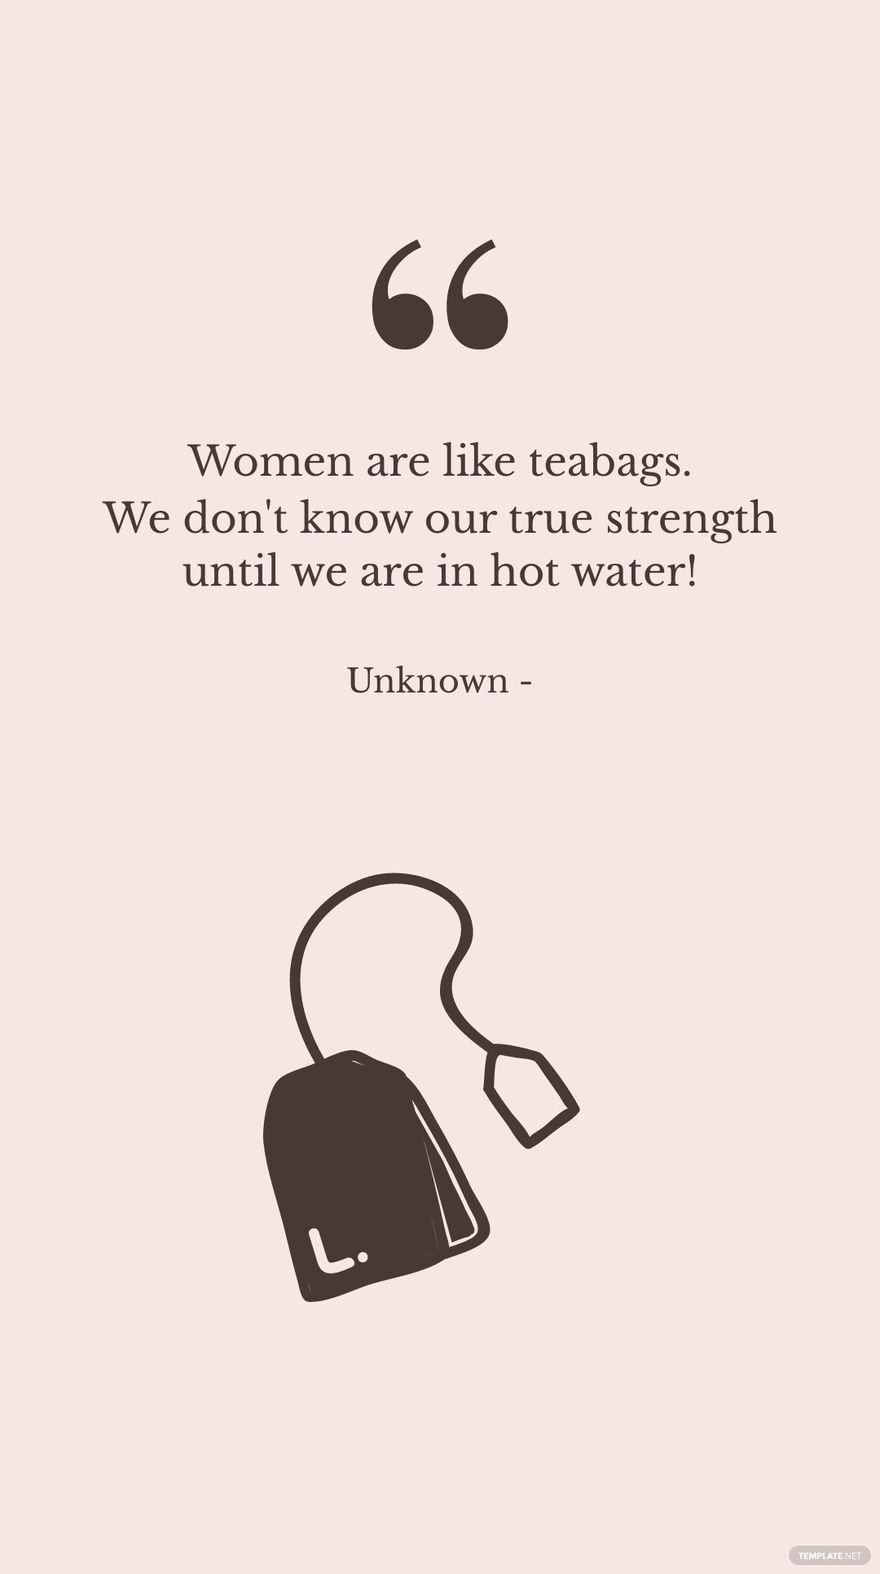 Unknown - Women are like teabags. We don't know our true strength until we are in hot water! in JPG